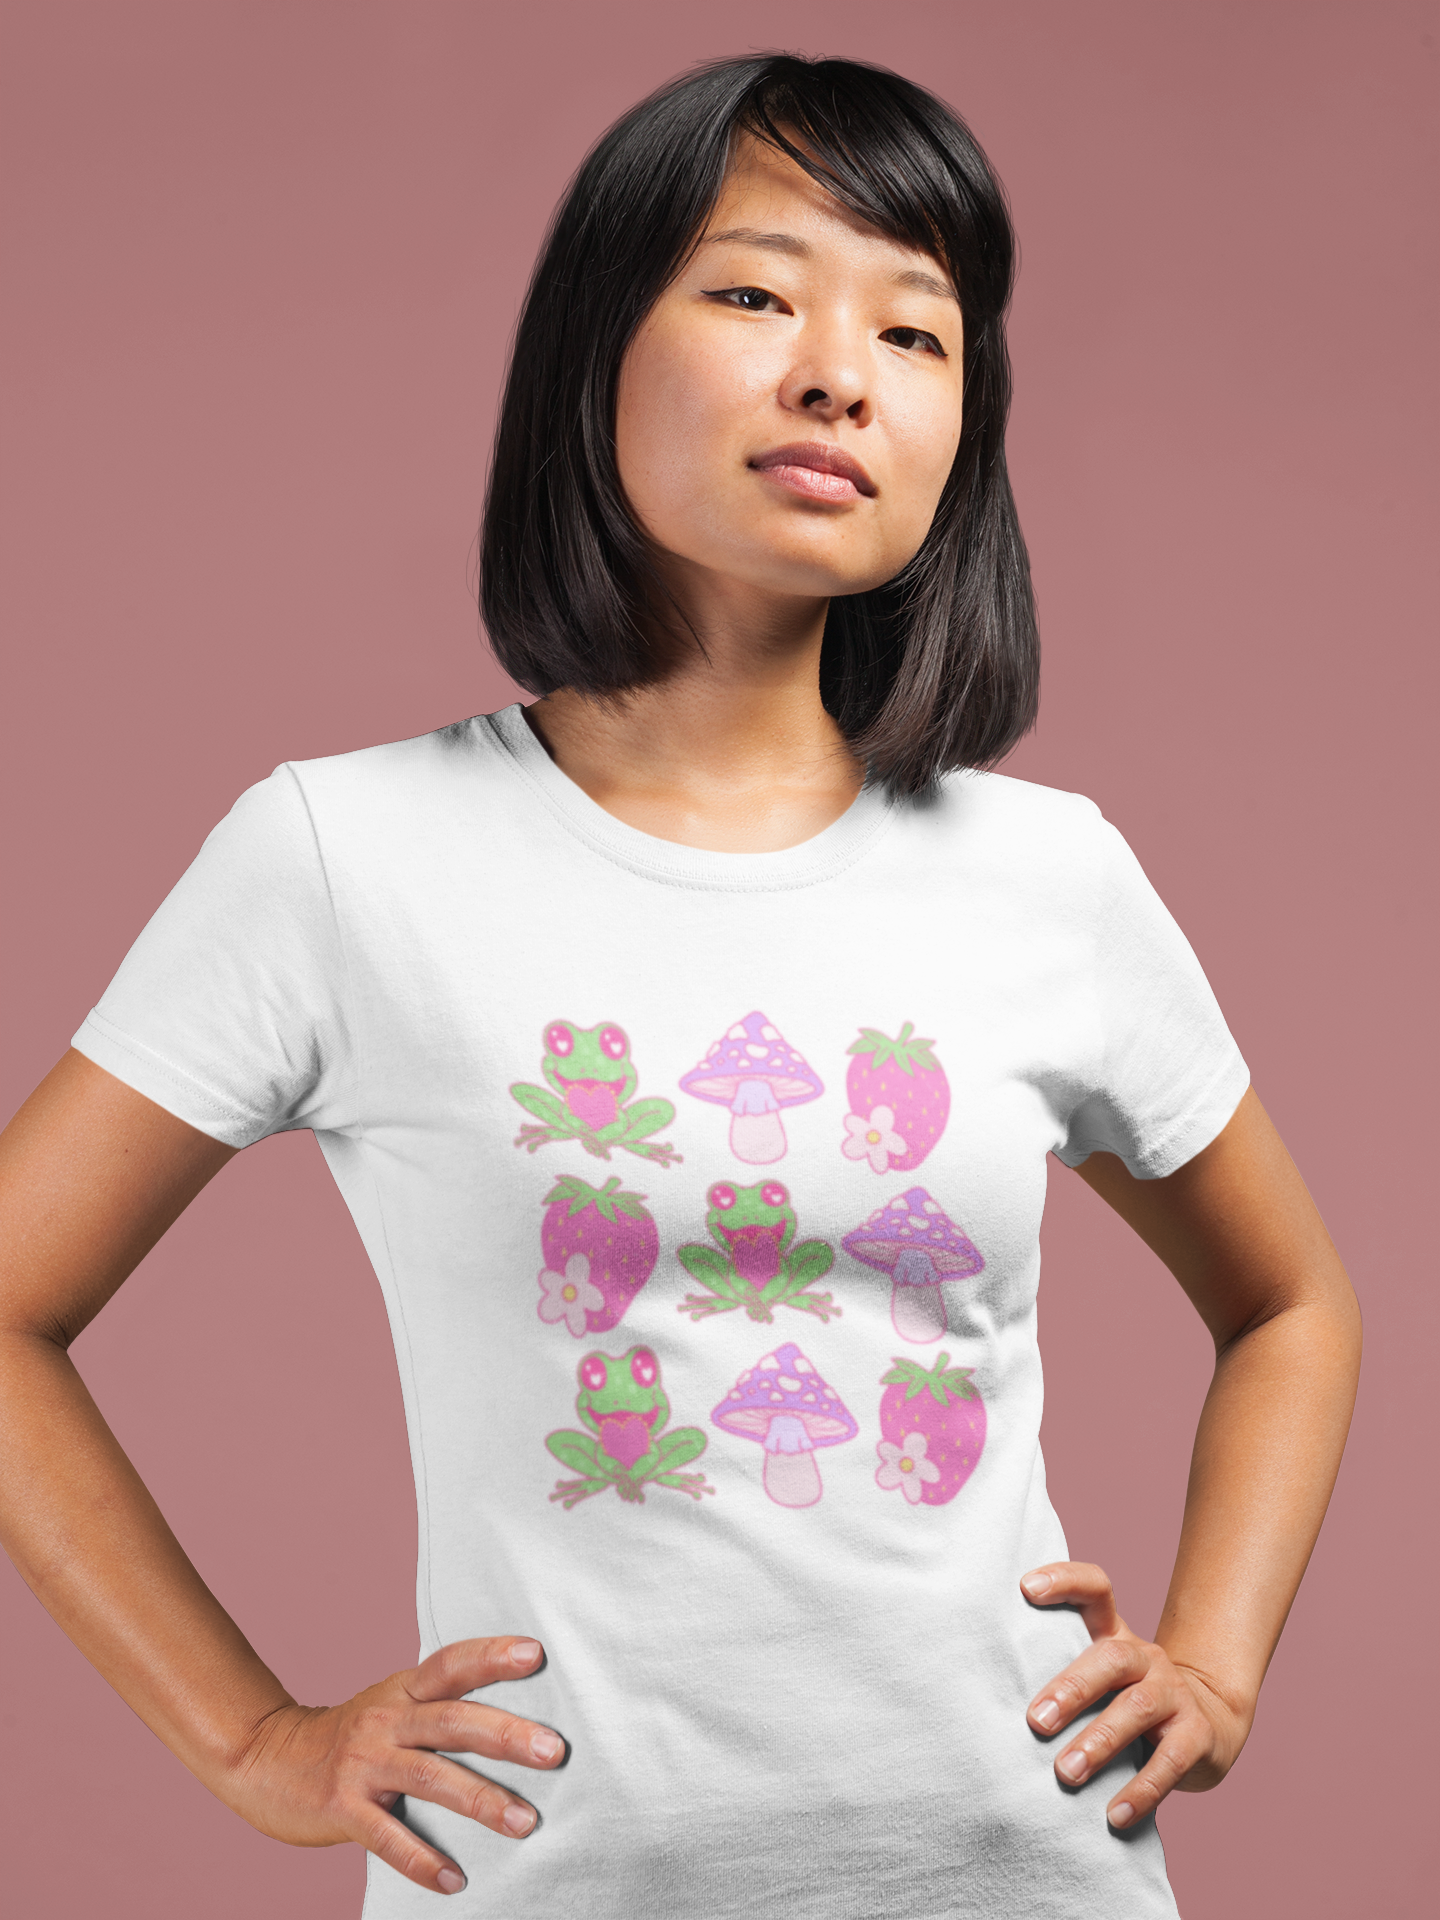 Hoppily Ever After Tee - Time's Reel